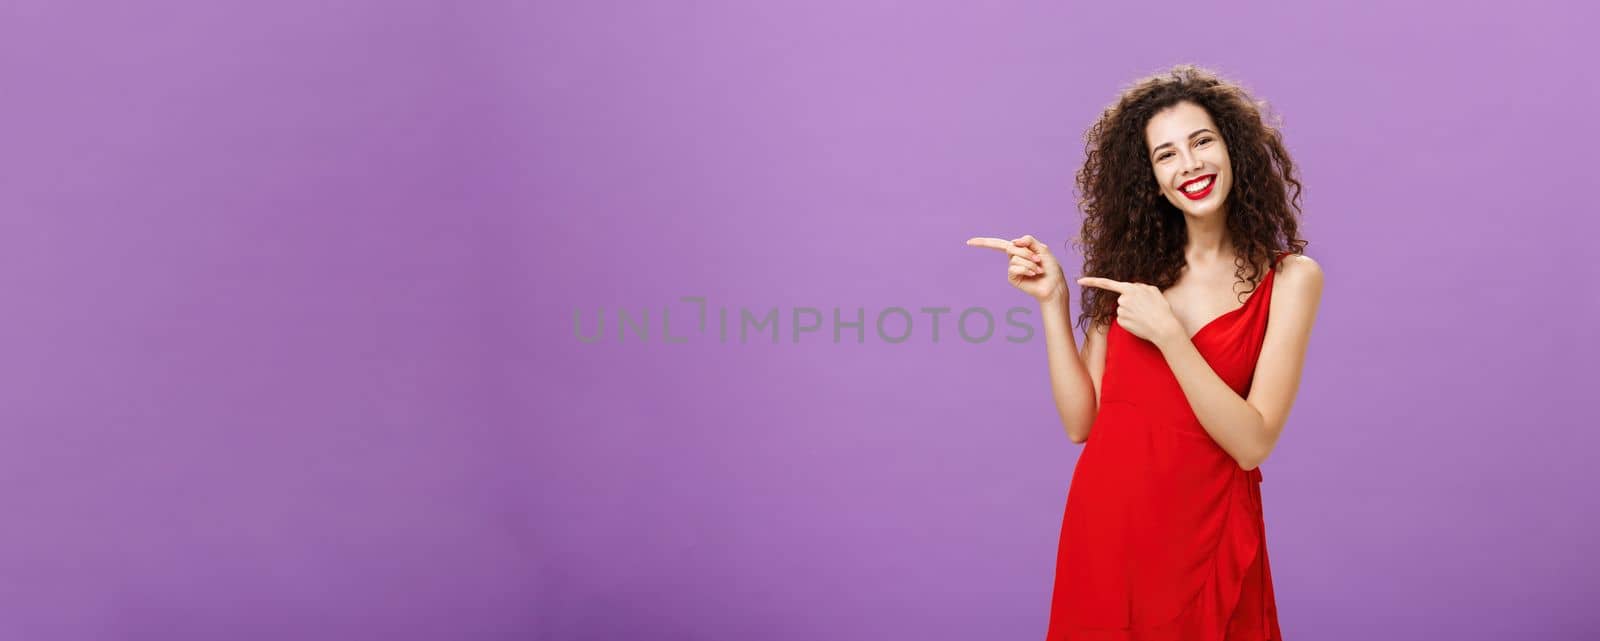 Girl suggesting copy space to try. Portrait of good-looking elegant caucasian woman with curly hair in stylish evening red dress pointing left and smiling inviting customers over purple background.